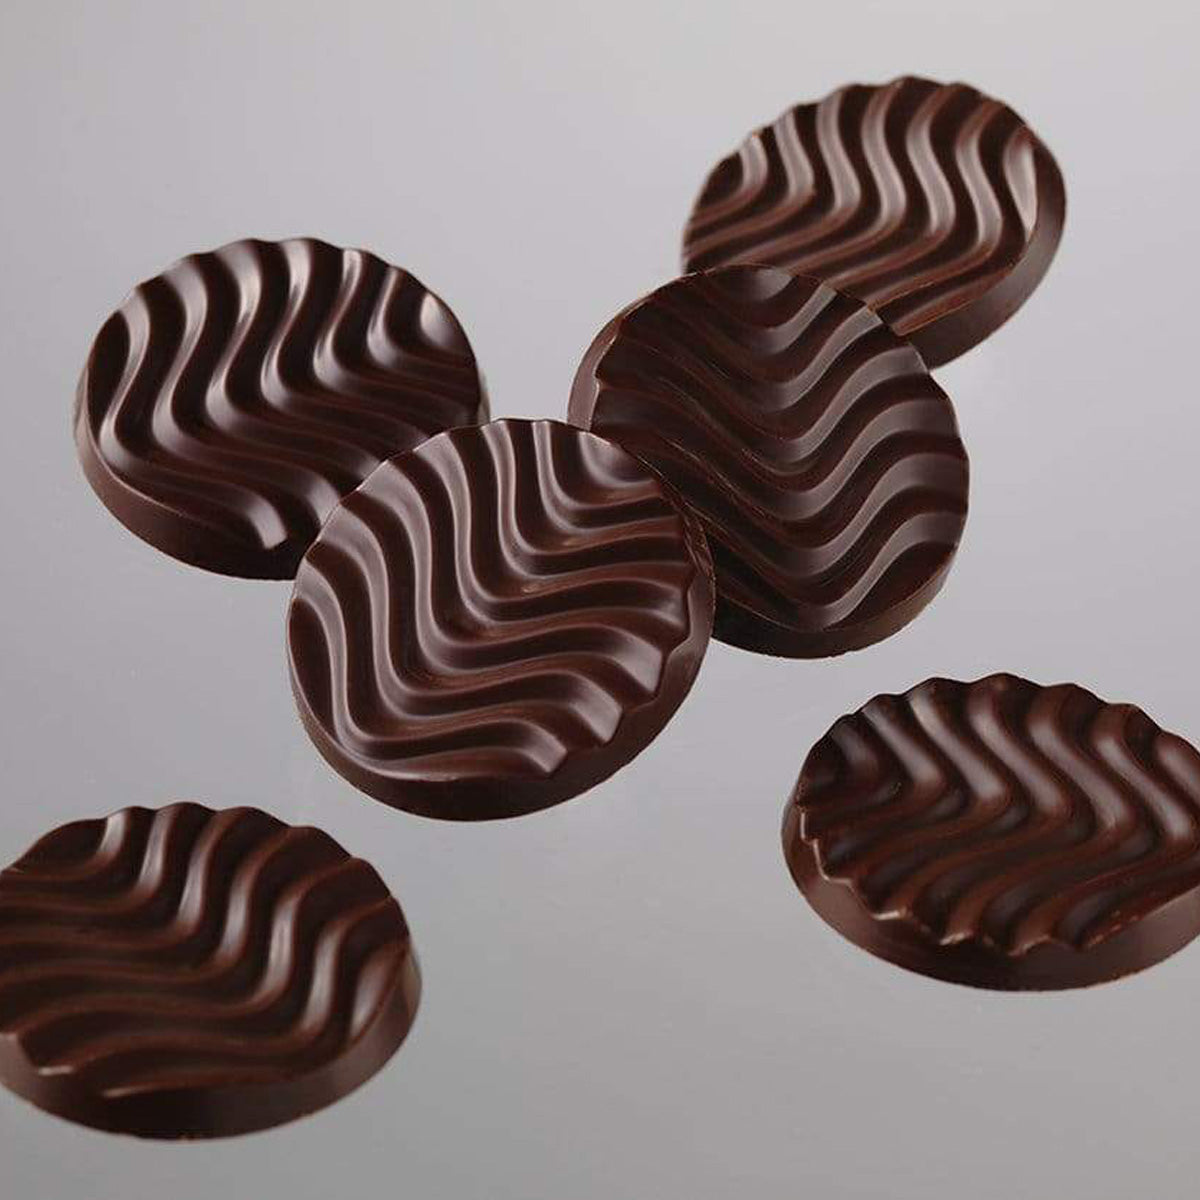 ROYCE' Chocolate - Pure Chocolate "Mild Bitter & Extra Bitter" - Image shows a black chocolate discs with a waved texture. Background is in color gray.